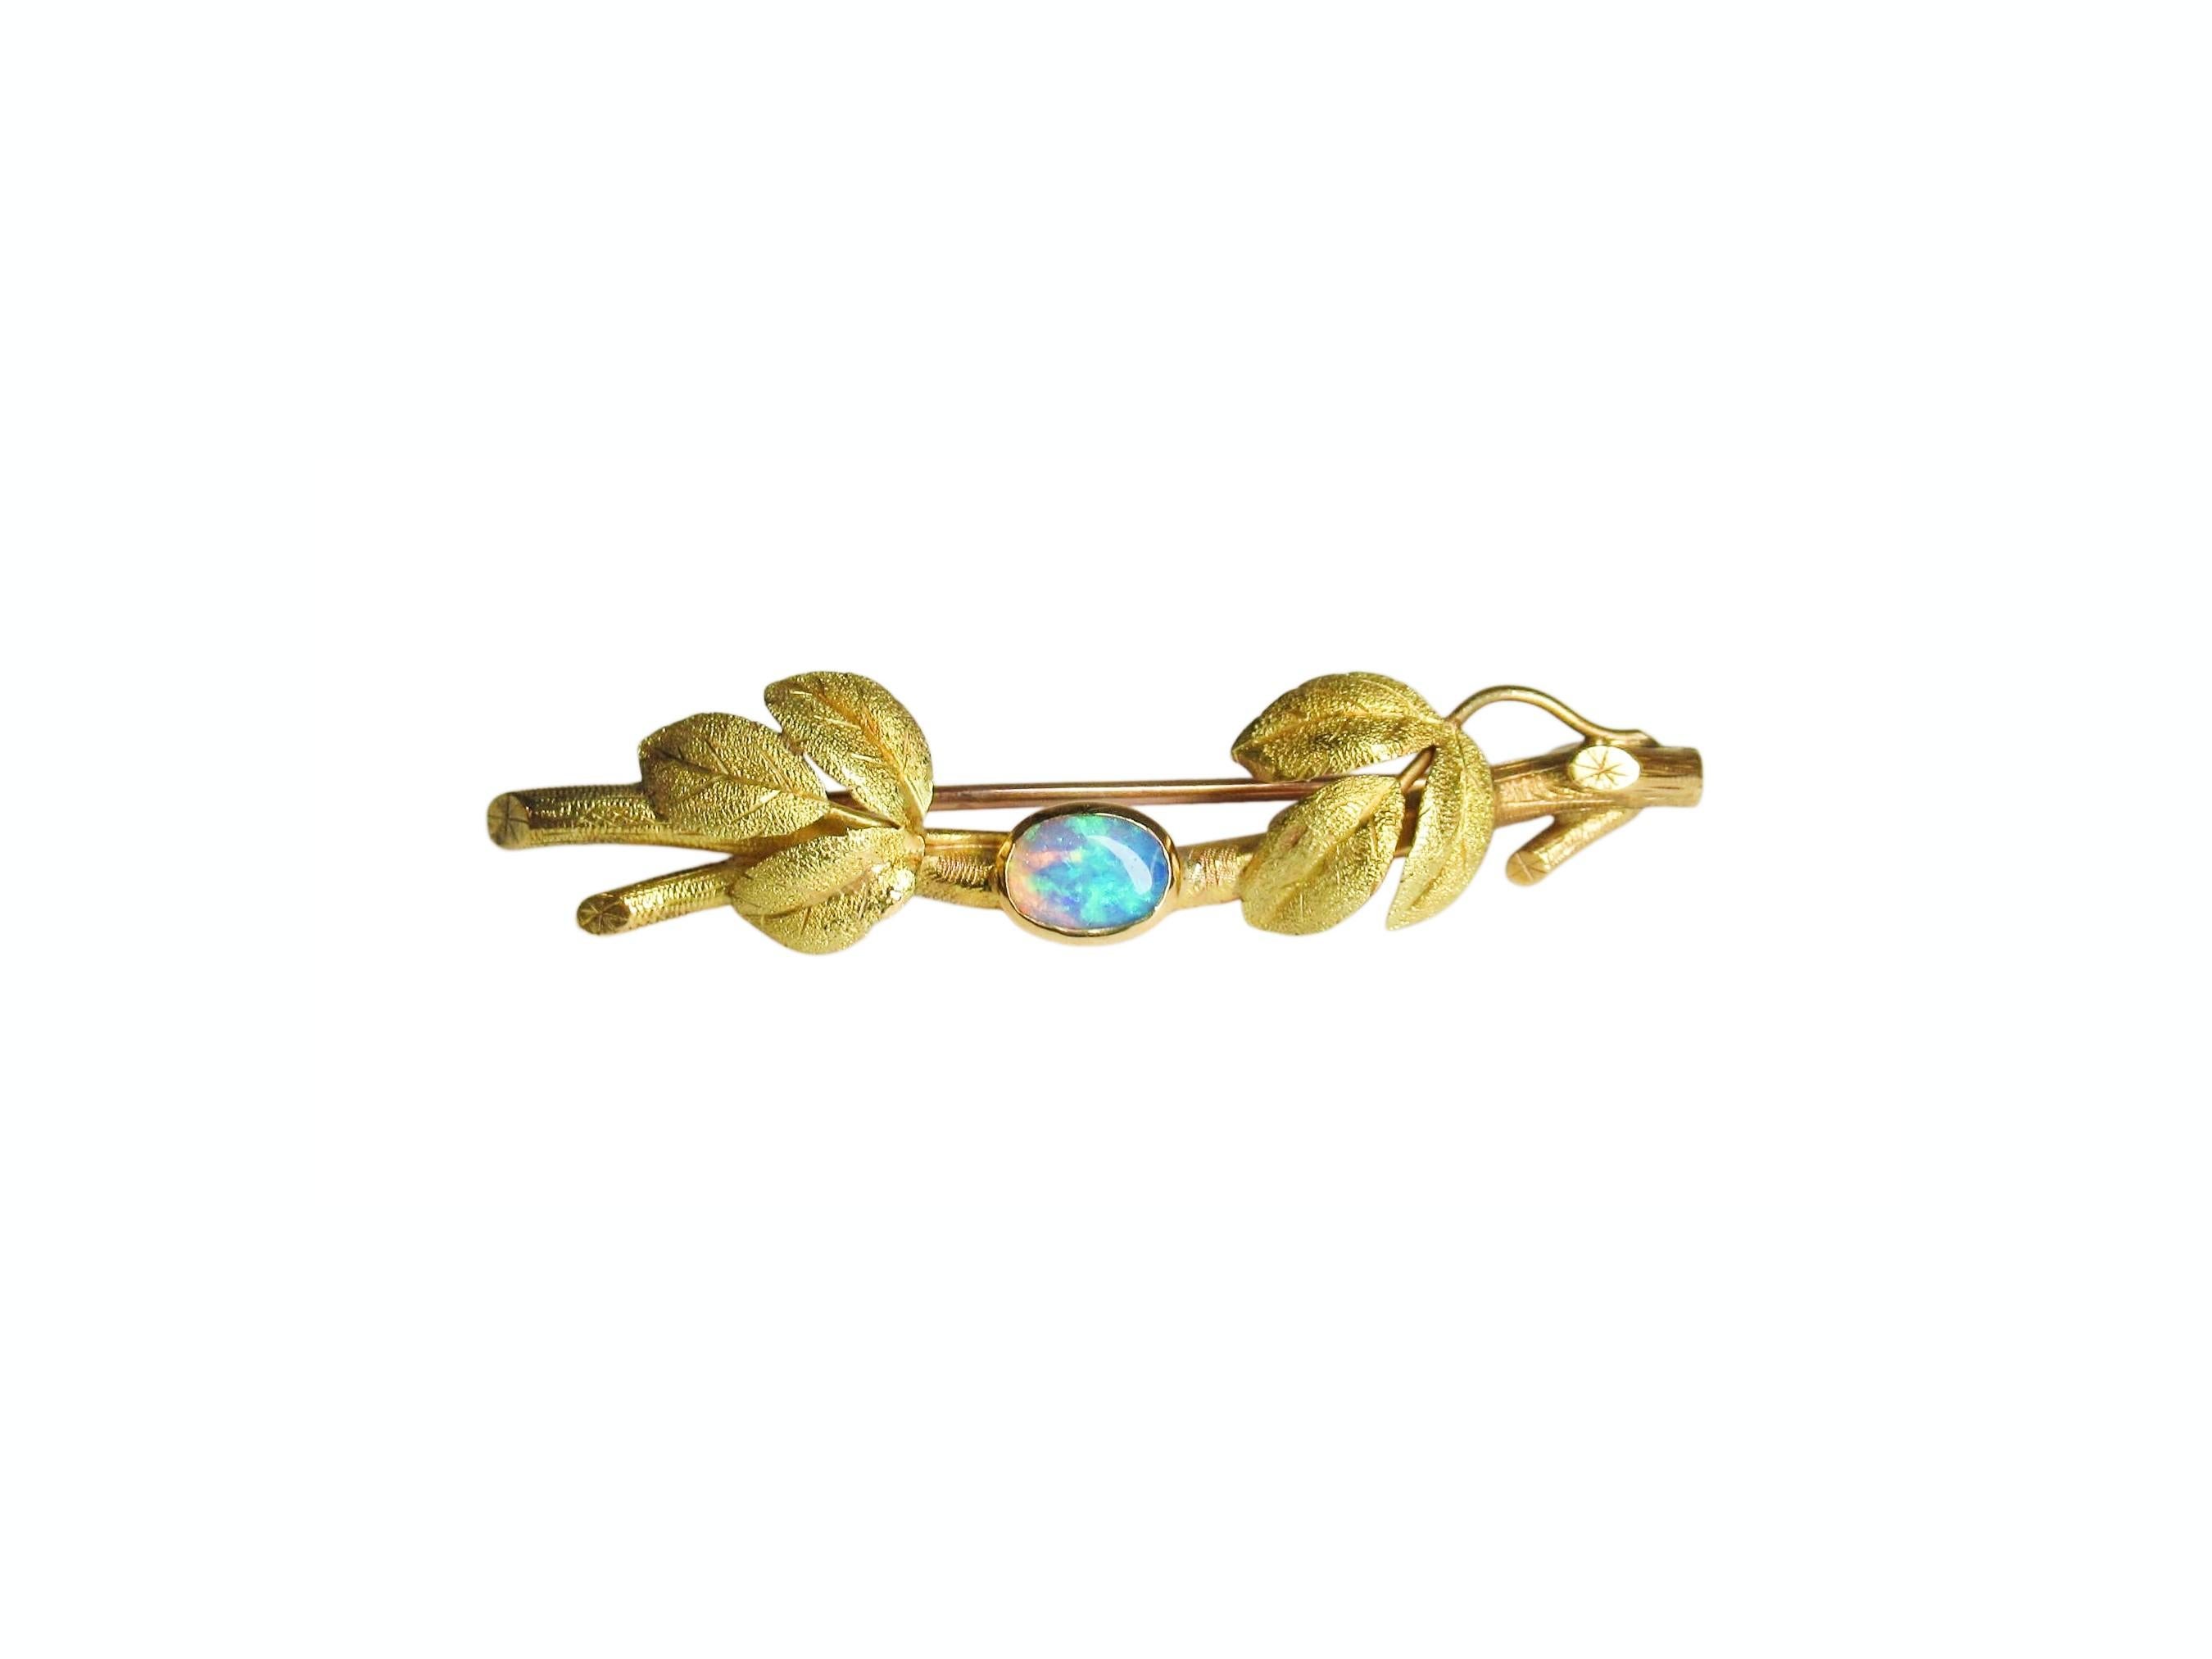 Stunning antique 18k yellow gold leaf and branch brooch with a gorgeous cabochon opal. The opal has exceptional color play with intense peacock blue, bright green, indigo and peach depending upon the light. The oval cabochon measures approximately